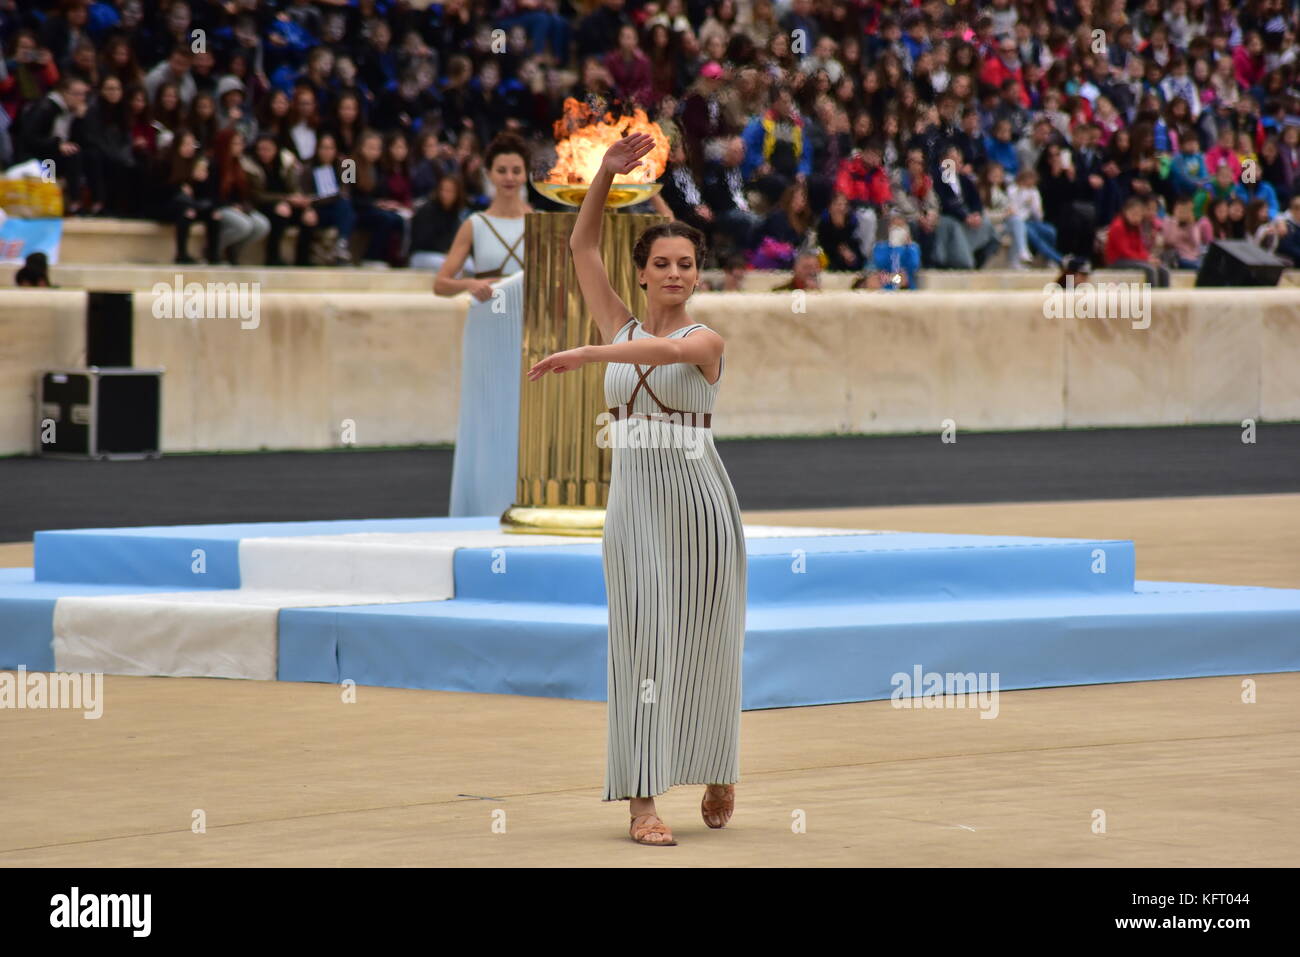 Athens, Greece. 31st Oct, 2017. During the Choreography performed by the Priestesses. The Handover Ceremony of the Olympic Flame for Winter Games PYEONGCHANG 2018, took place today in Panathenaic Stadium in the presence of the President of Hellenic Republic Prokopis Pavlopoulos. Credit: Dimitrios Karvountzis/Pacific Press/Alamy Live News Stock Photo